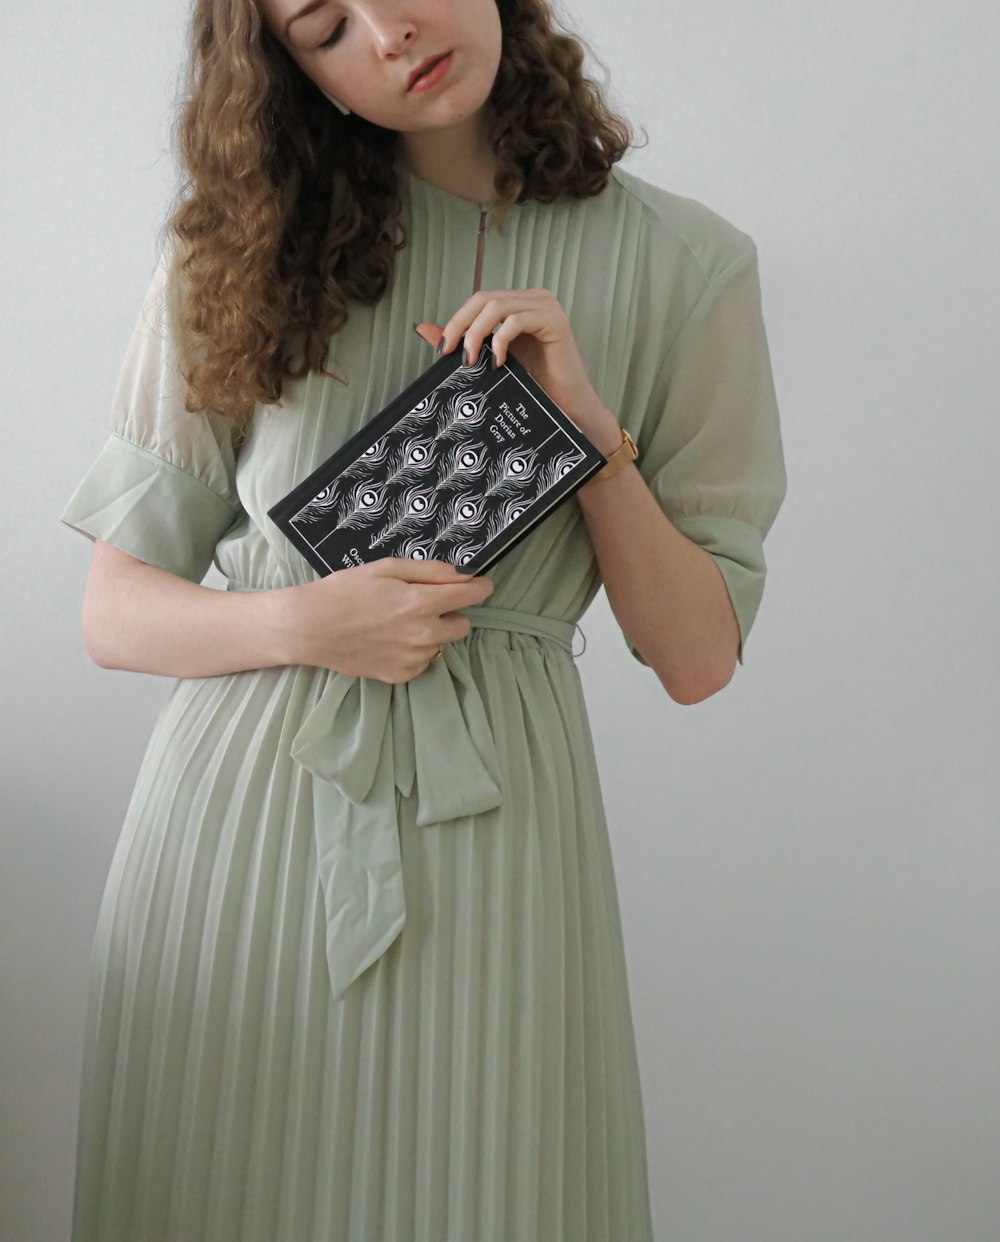 a woman in a green dress holding a black box